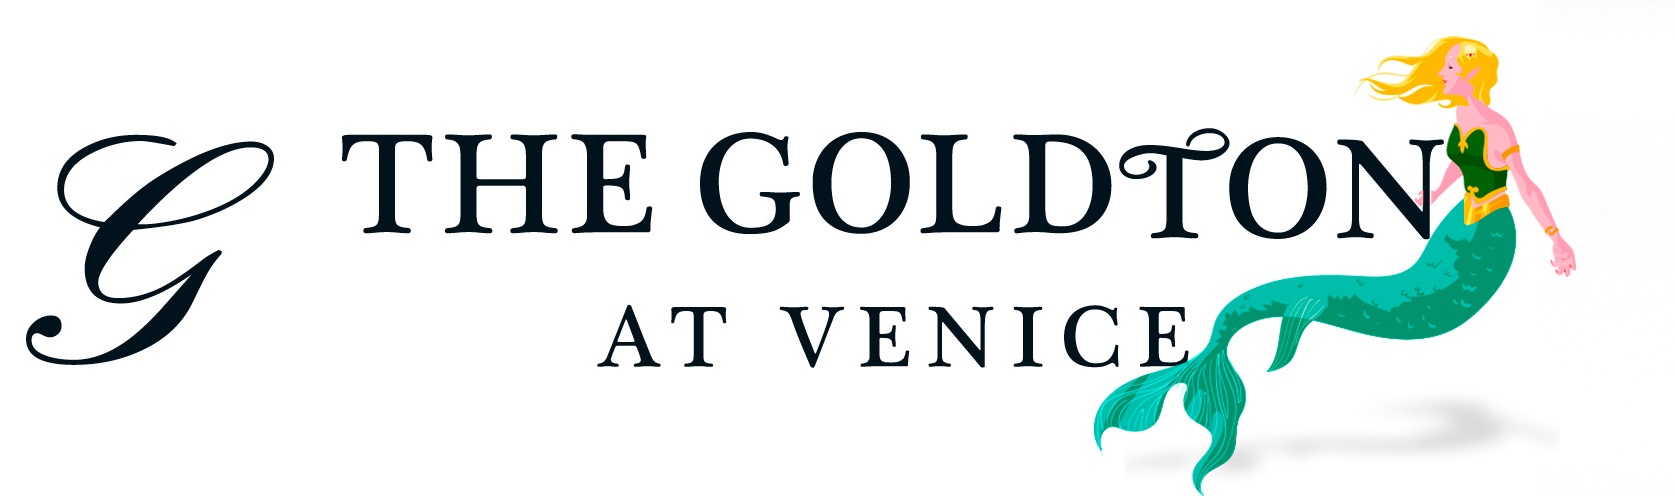 The Goldton at Venice